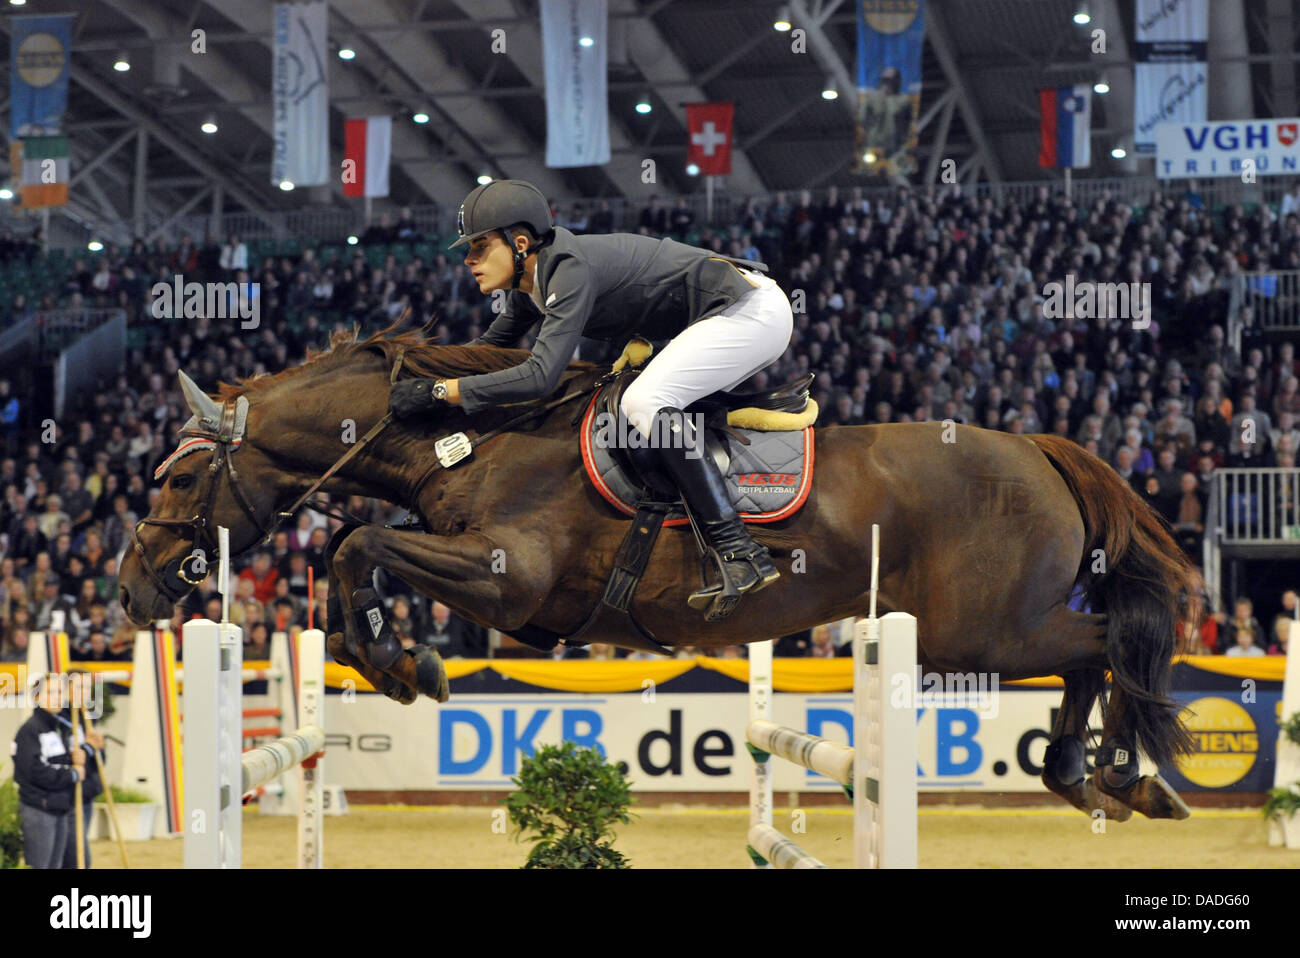 The German equestrian Joerg Oppermann in action on his horse Che Guevara during the German Classics in Hanover, Germany, 23 October 2011. Photo: Jochen Luebke Stock Photo